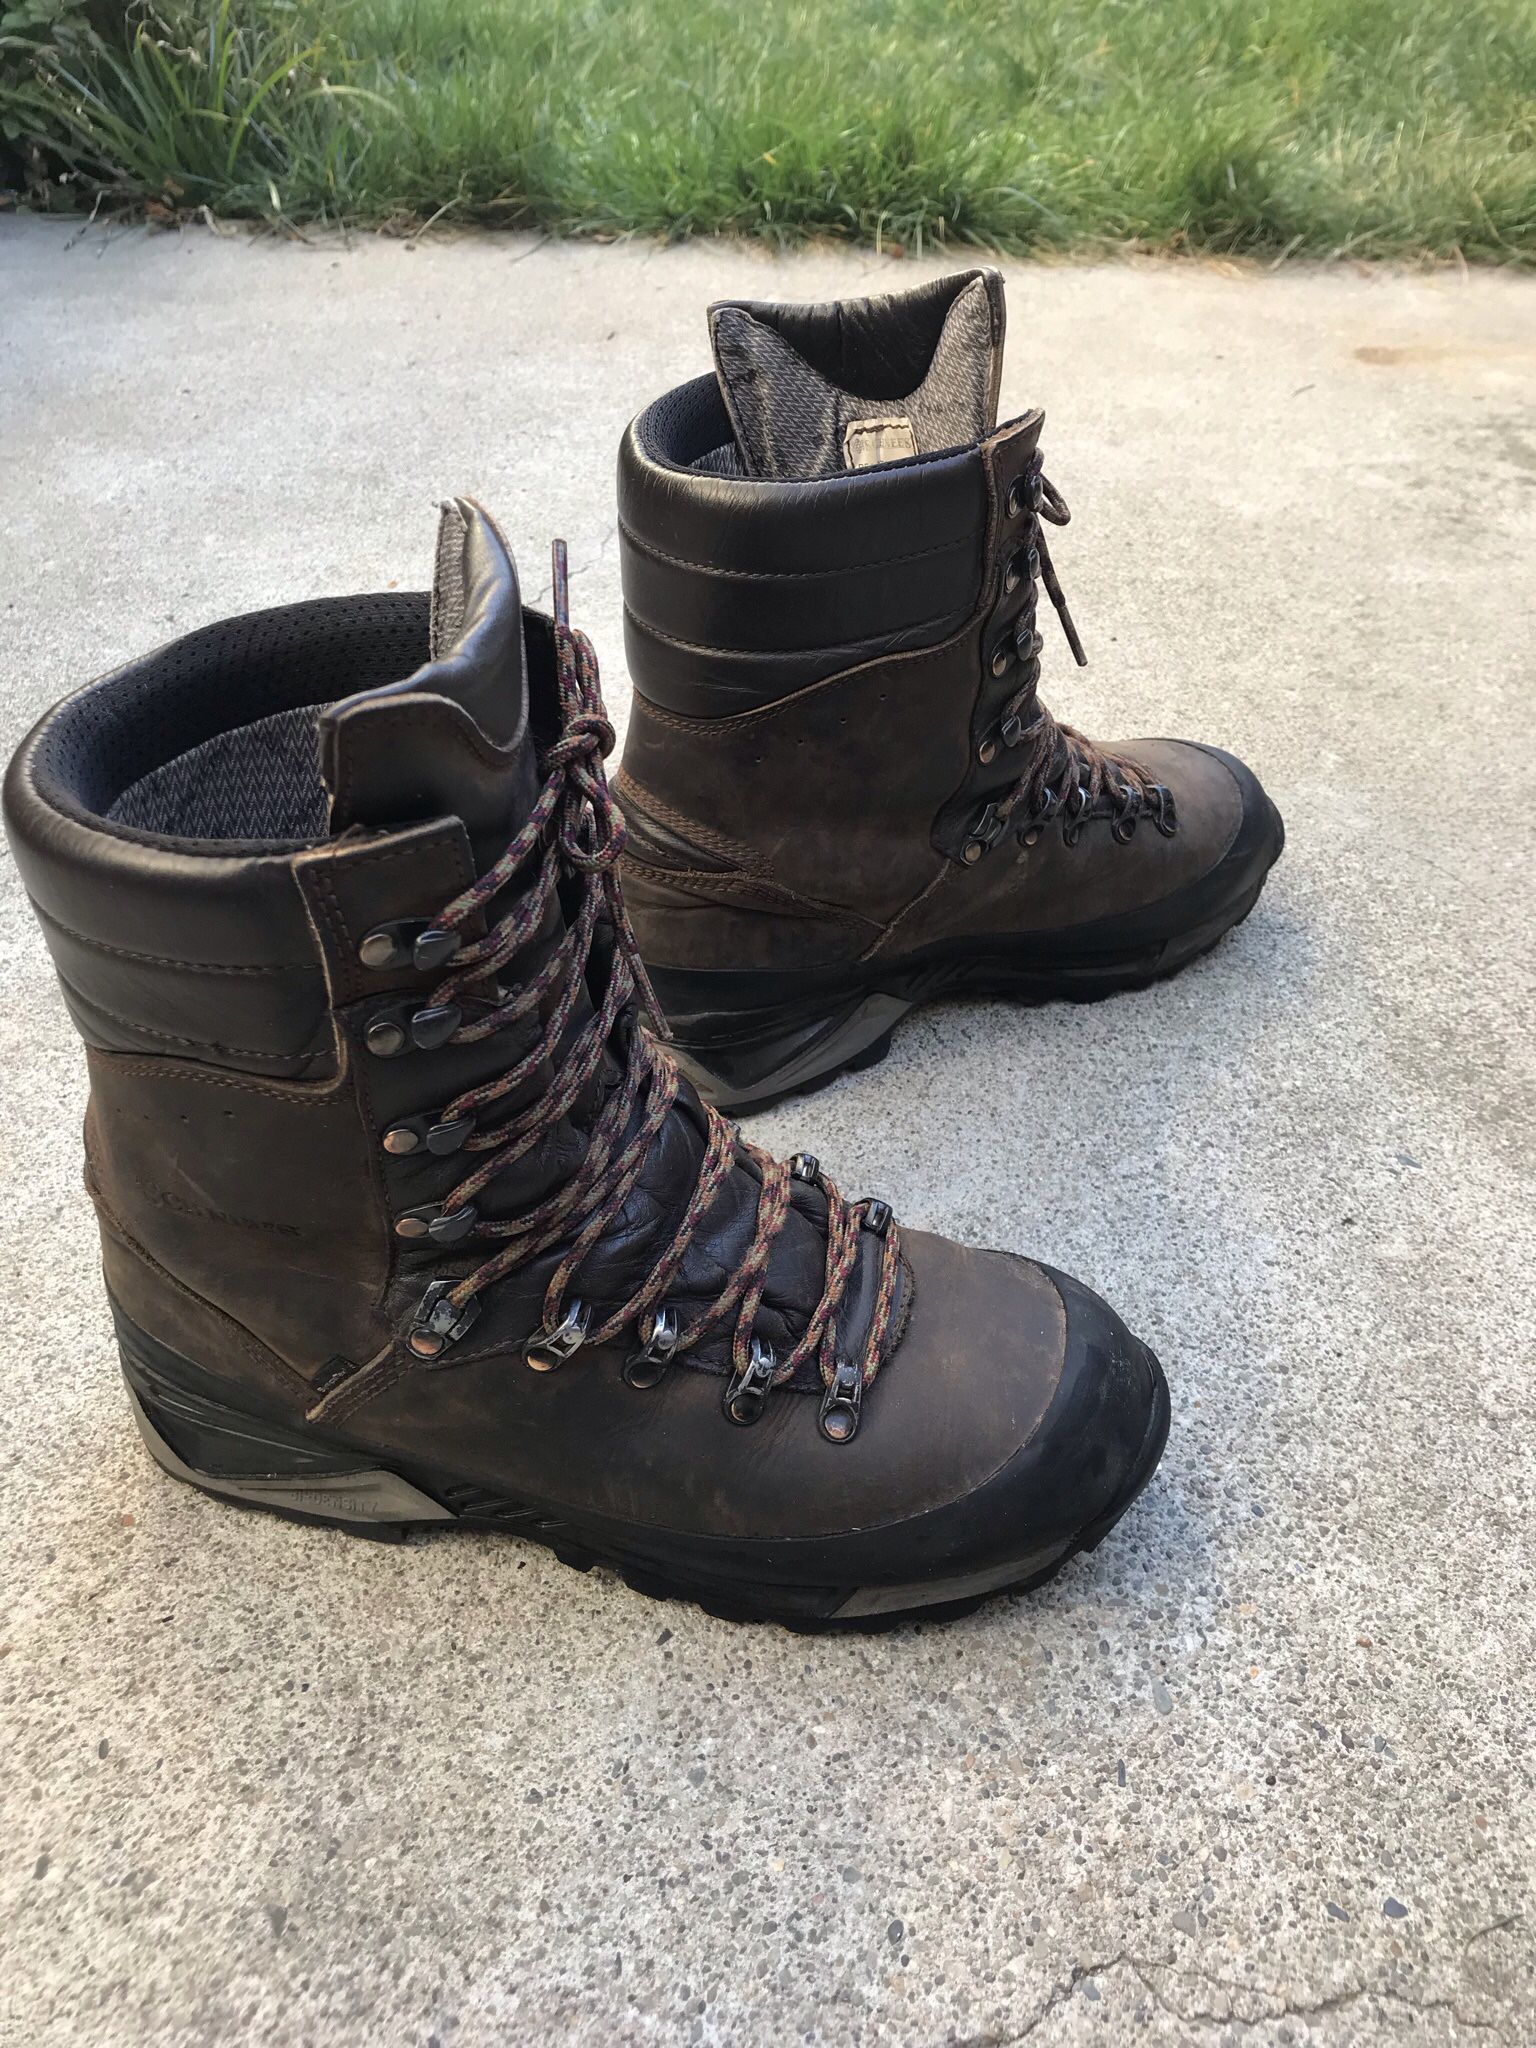 Schnee’s Hiking Boots 